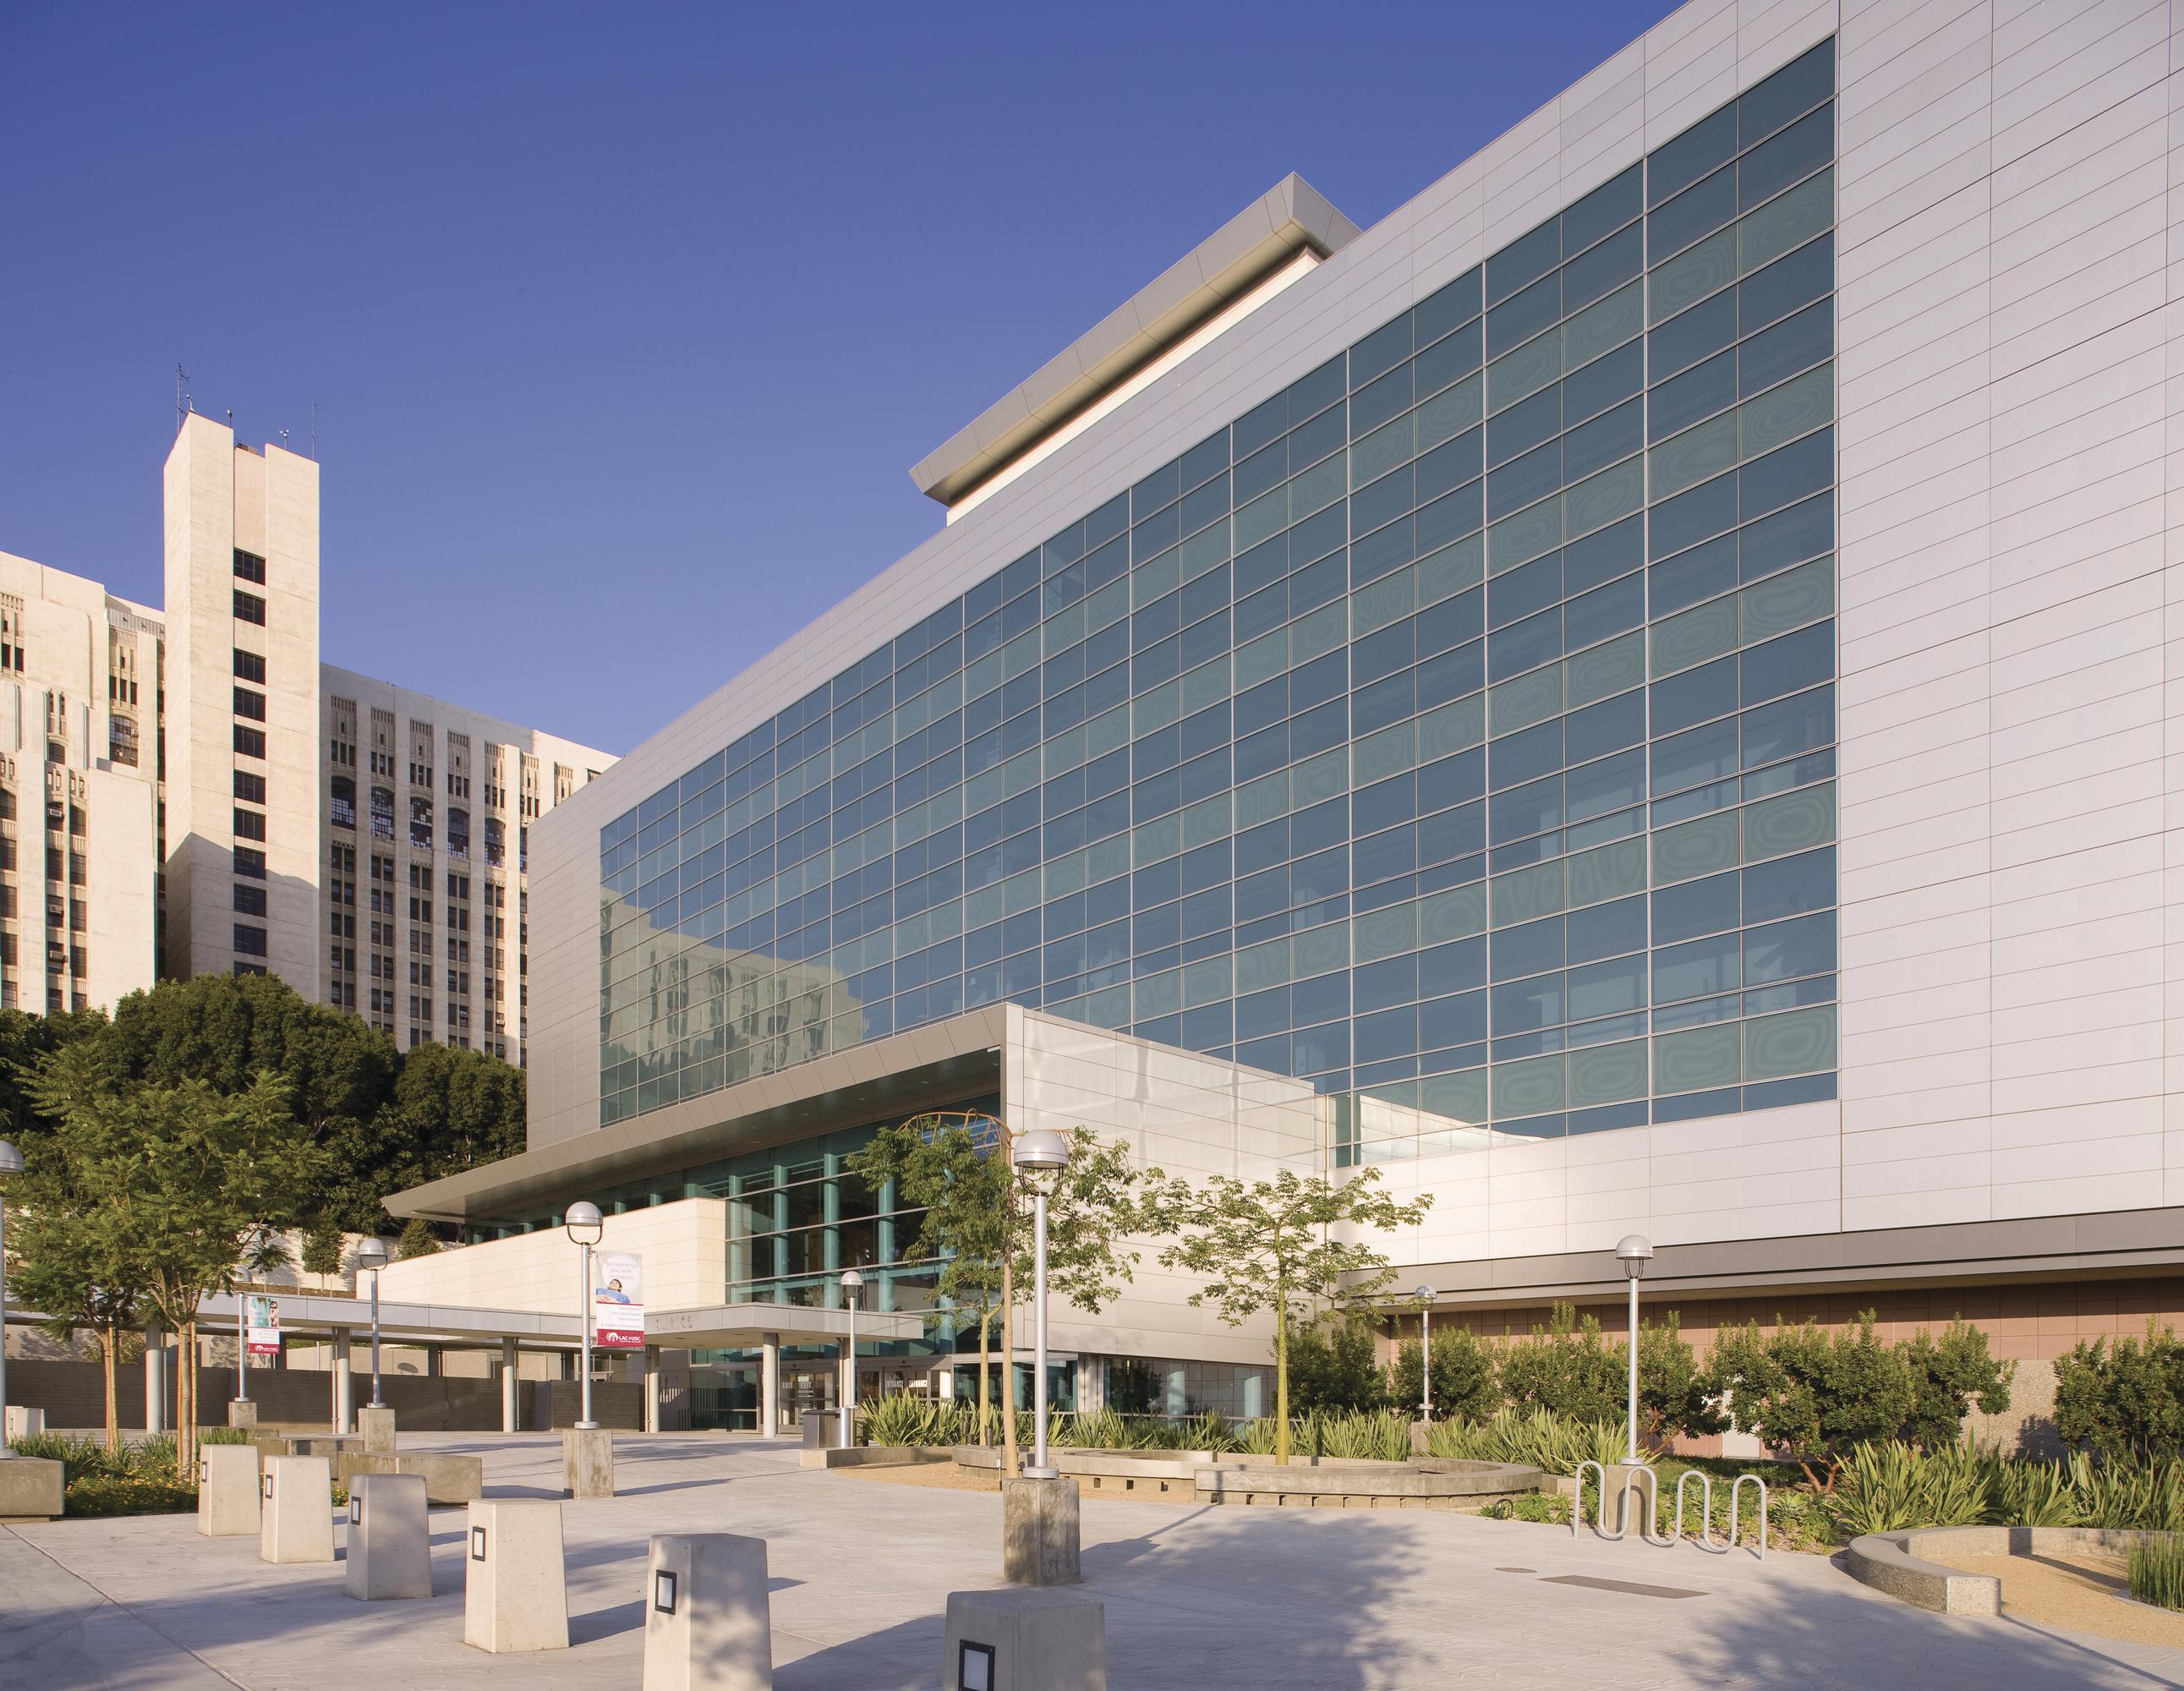 LAC+USC Medical Center